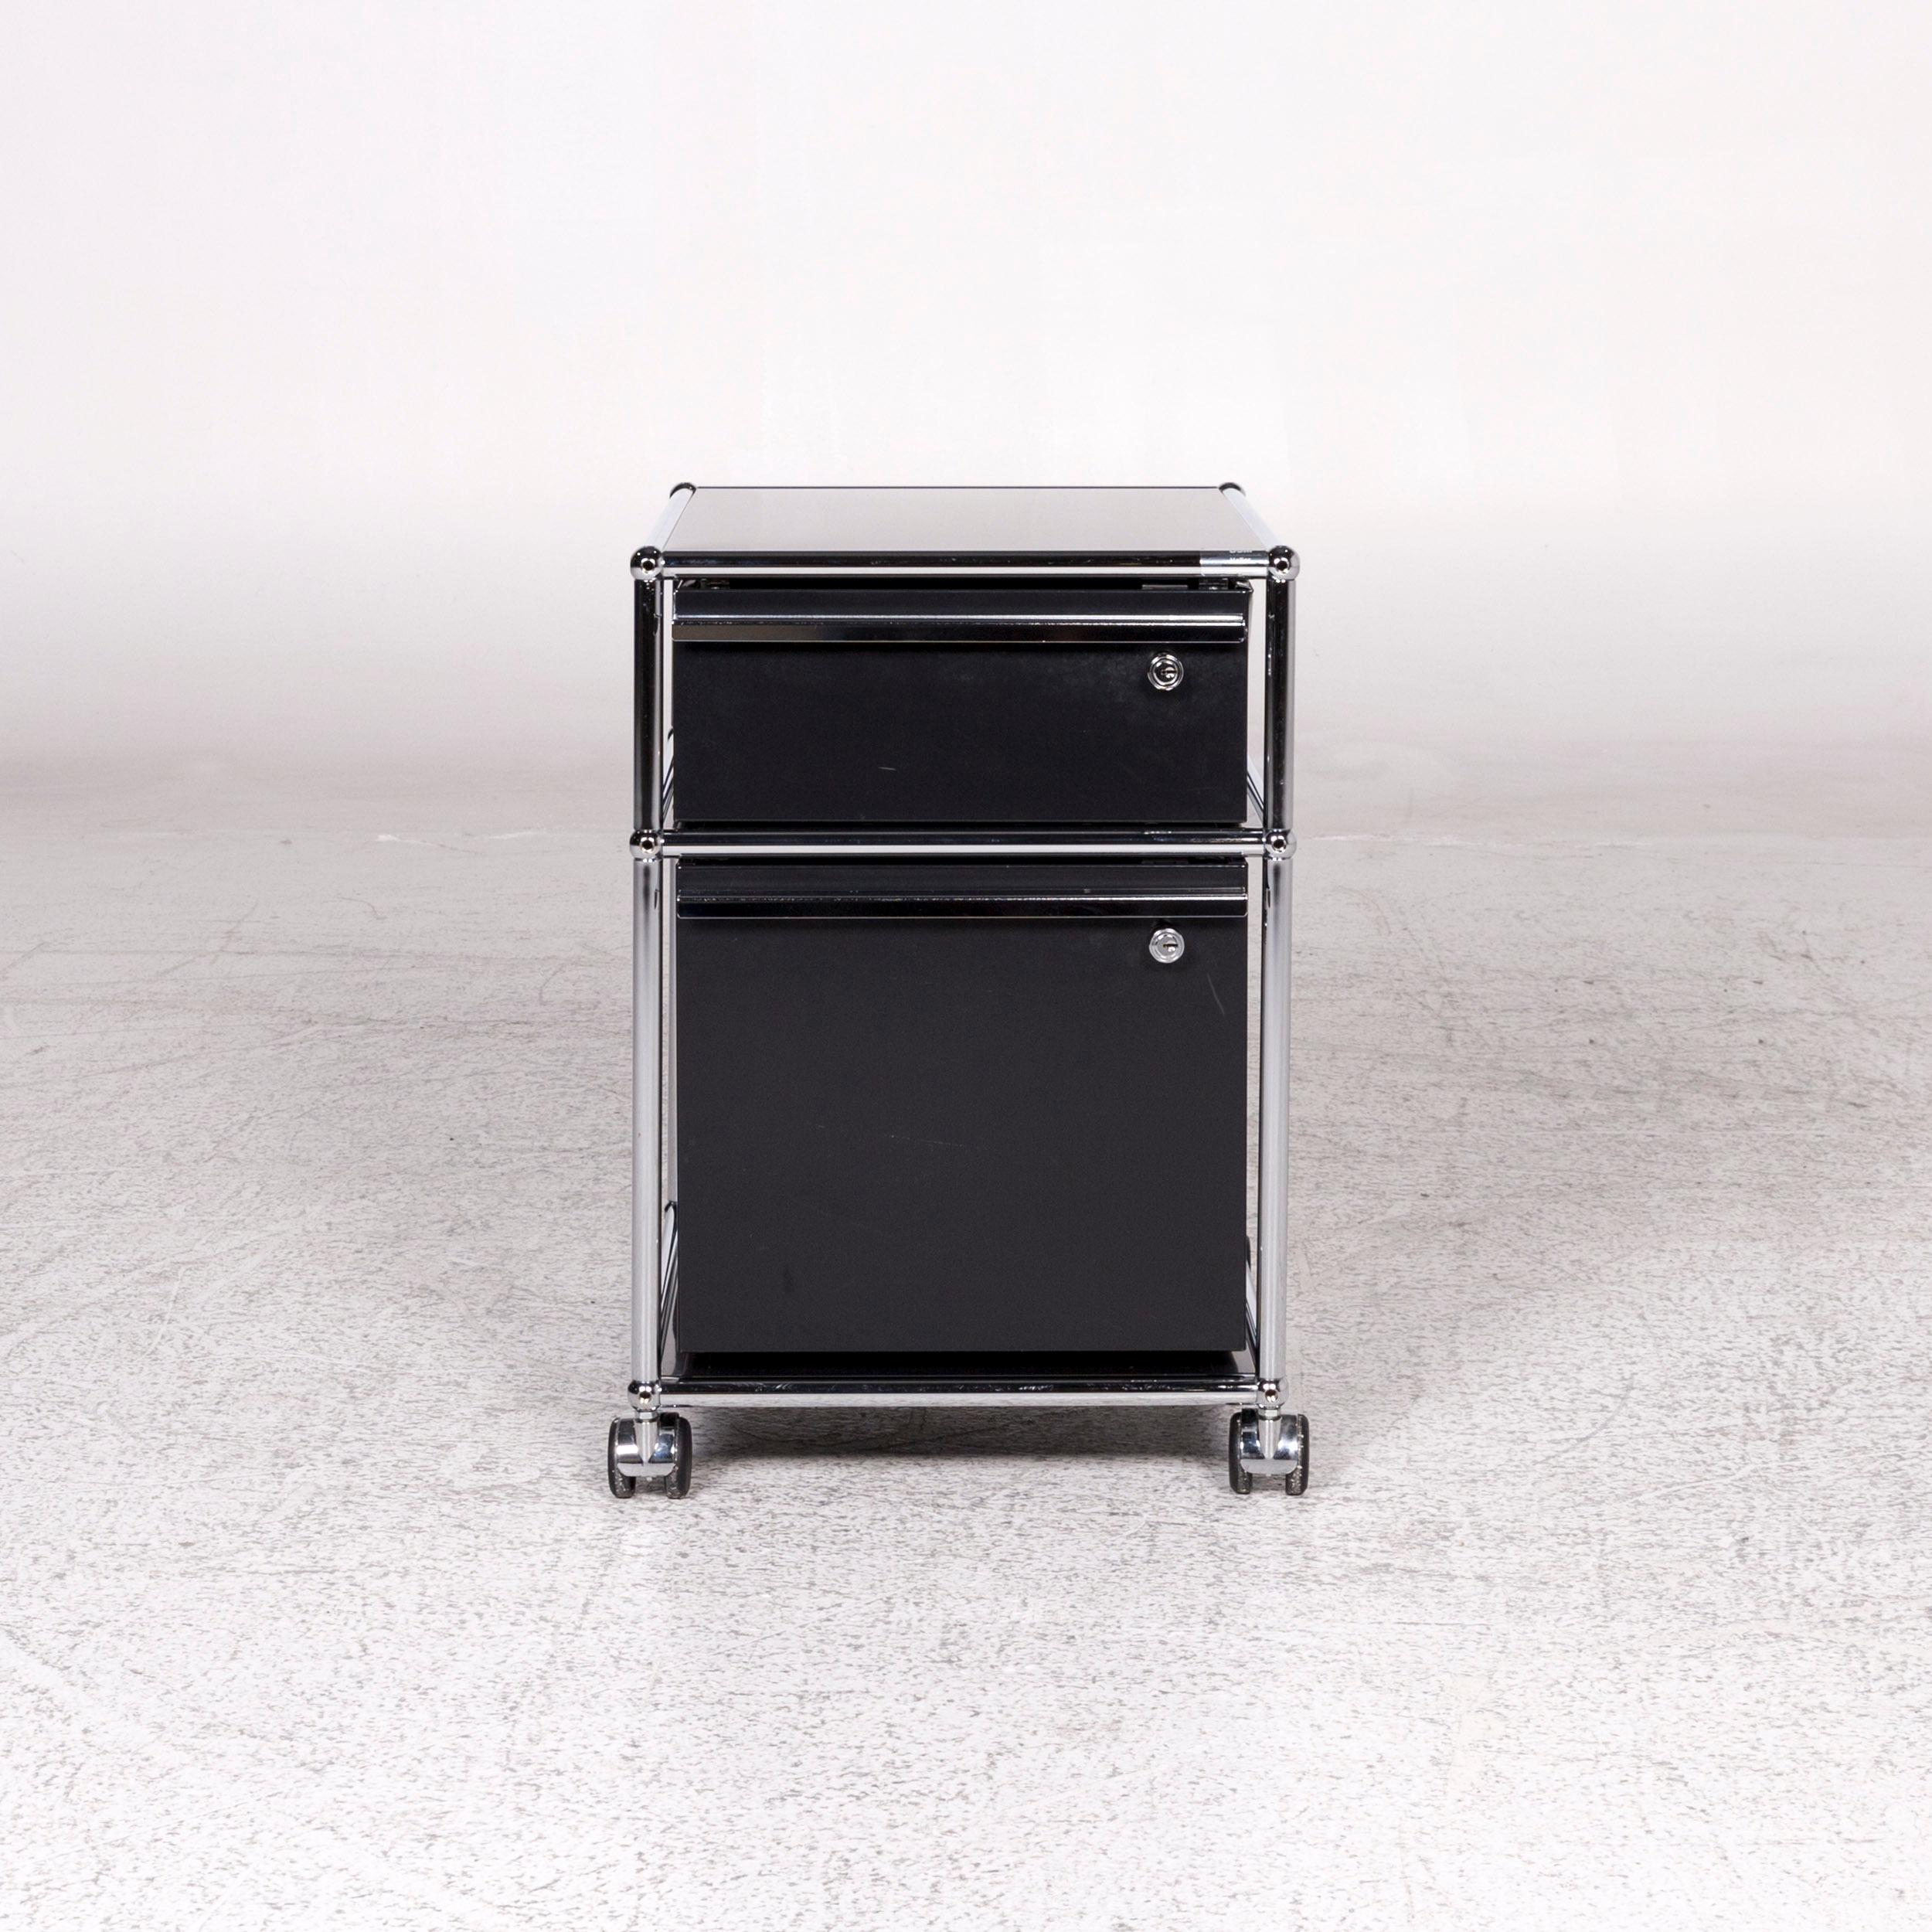 We bring to you an USM haller chrome roll container black sideboard office.

 Product measurements in centimeters:
 
 Depth: 56
 Width: 43
 Height: 61.






 